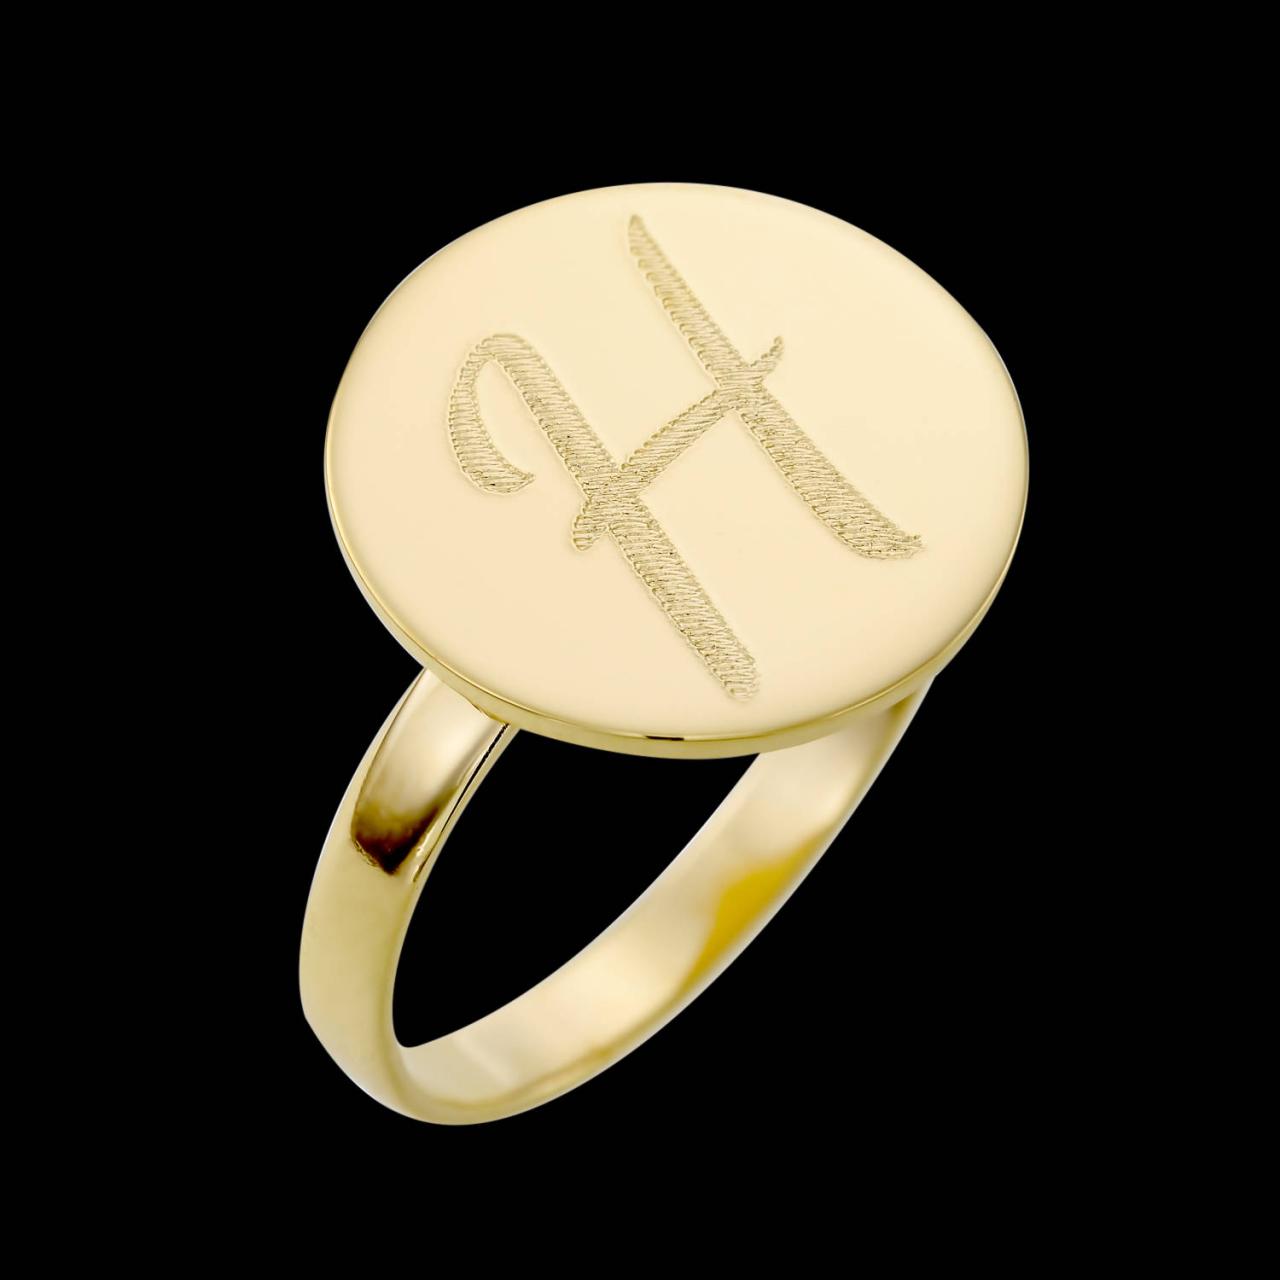 Personalized Ring - Custom Ring - Engraved Ring - Personalized Jewelry - Personalized Gift - Personalized Letter Ring - Gold Letter Ring - Gold